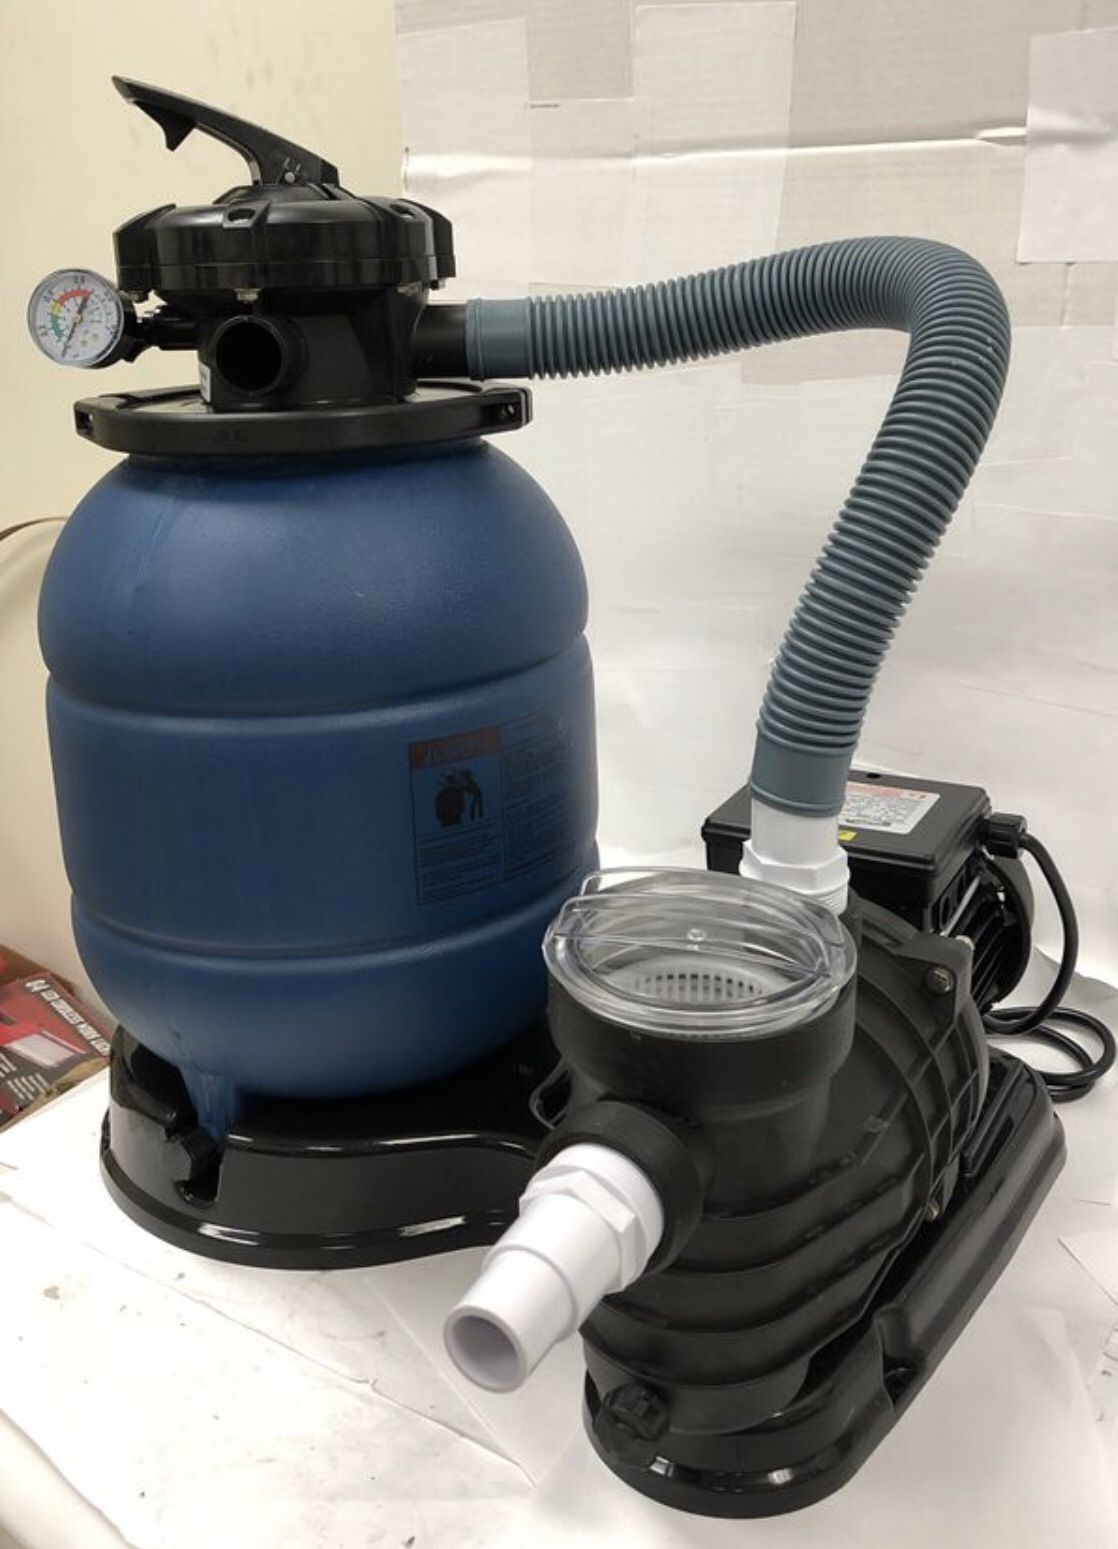 12” sand filter and water pump system for intex above ground pool